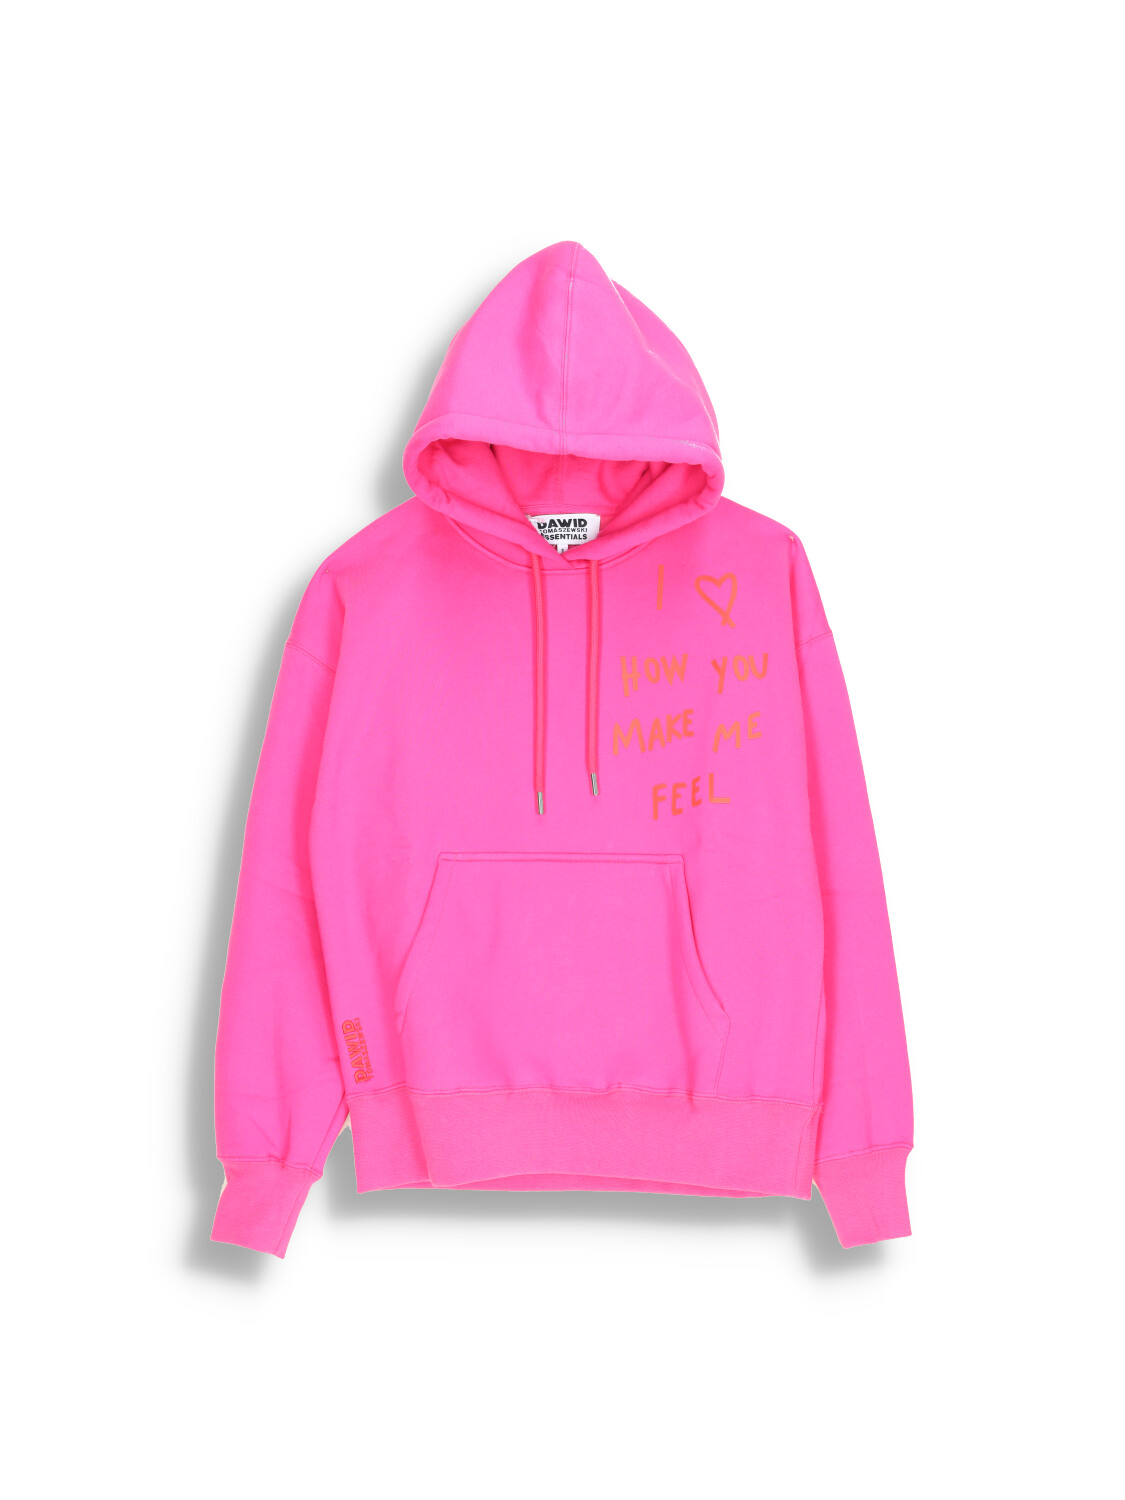 Hoodie with slogan on the chest